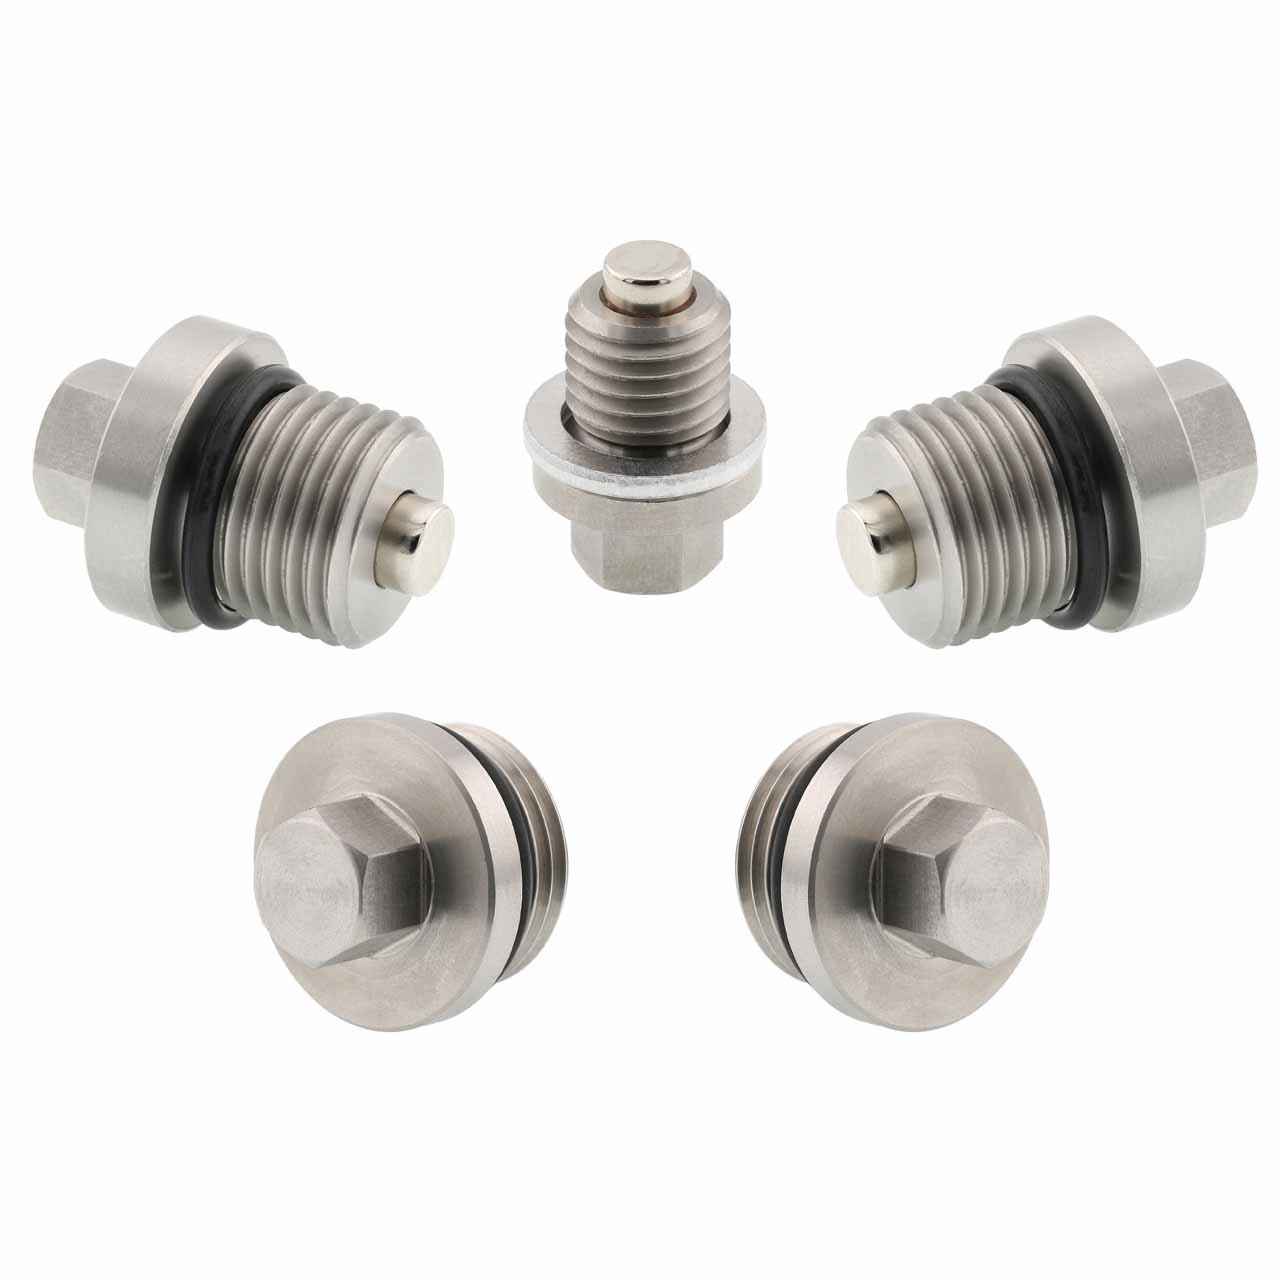 Polaris RZR S 900 Magnetic Oil Drain Plug Kit - 2015-2021 - Engine, Transmission, Differential - Made In USA